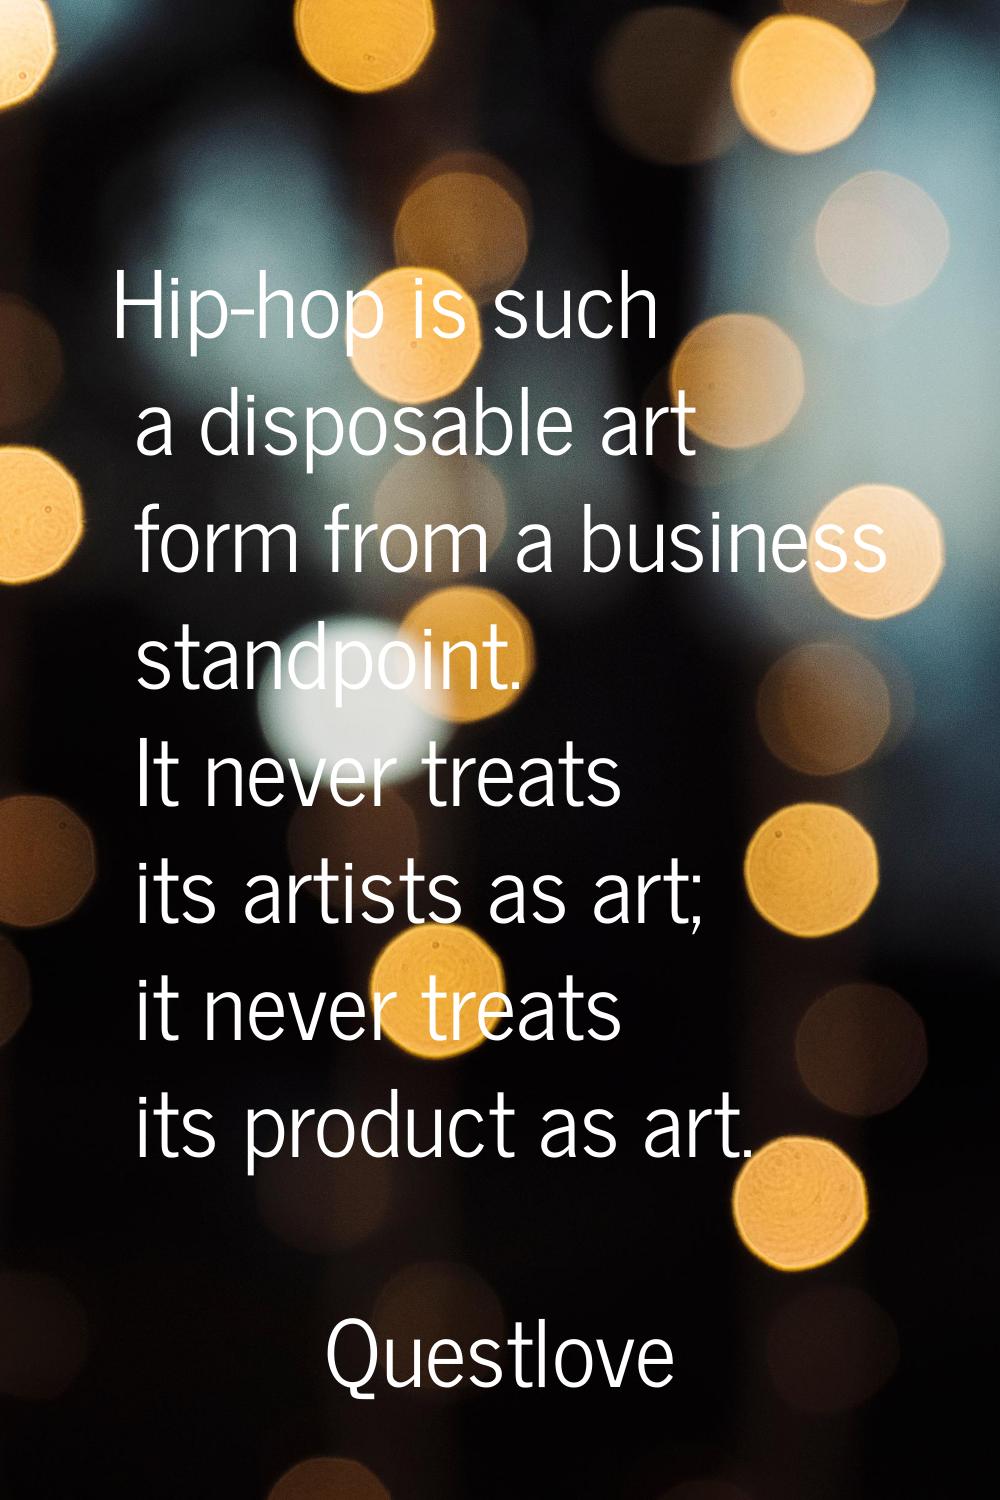 Hip-hop is such a disposable art form from a business standpoint. It never treats its artists as ar